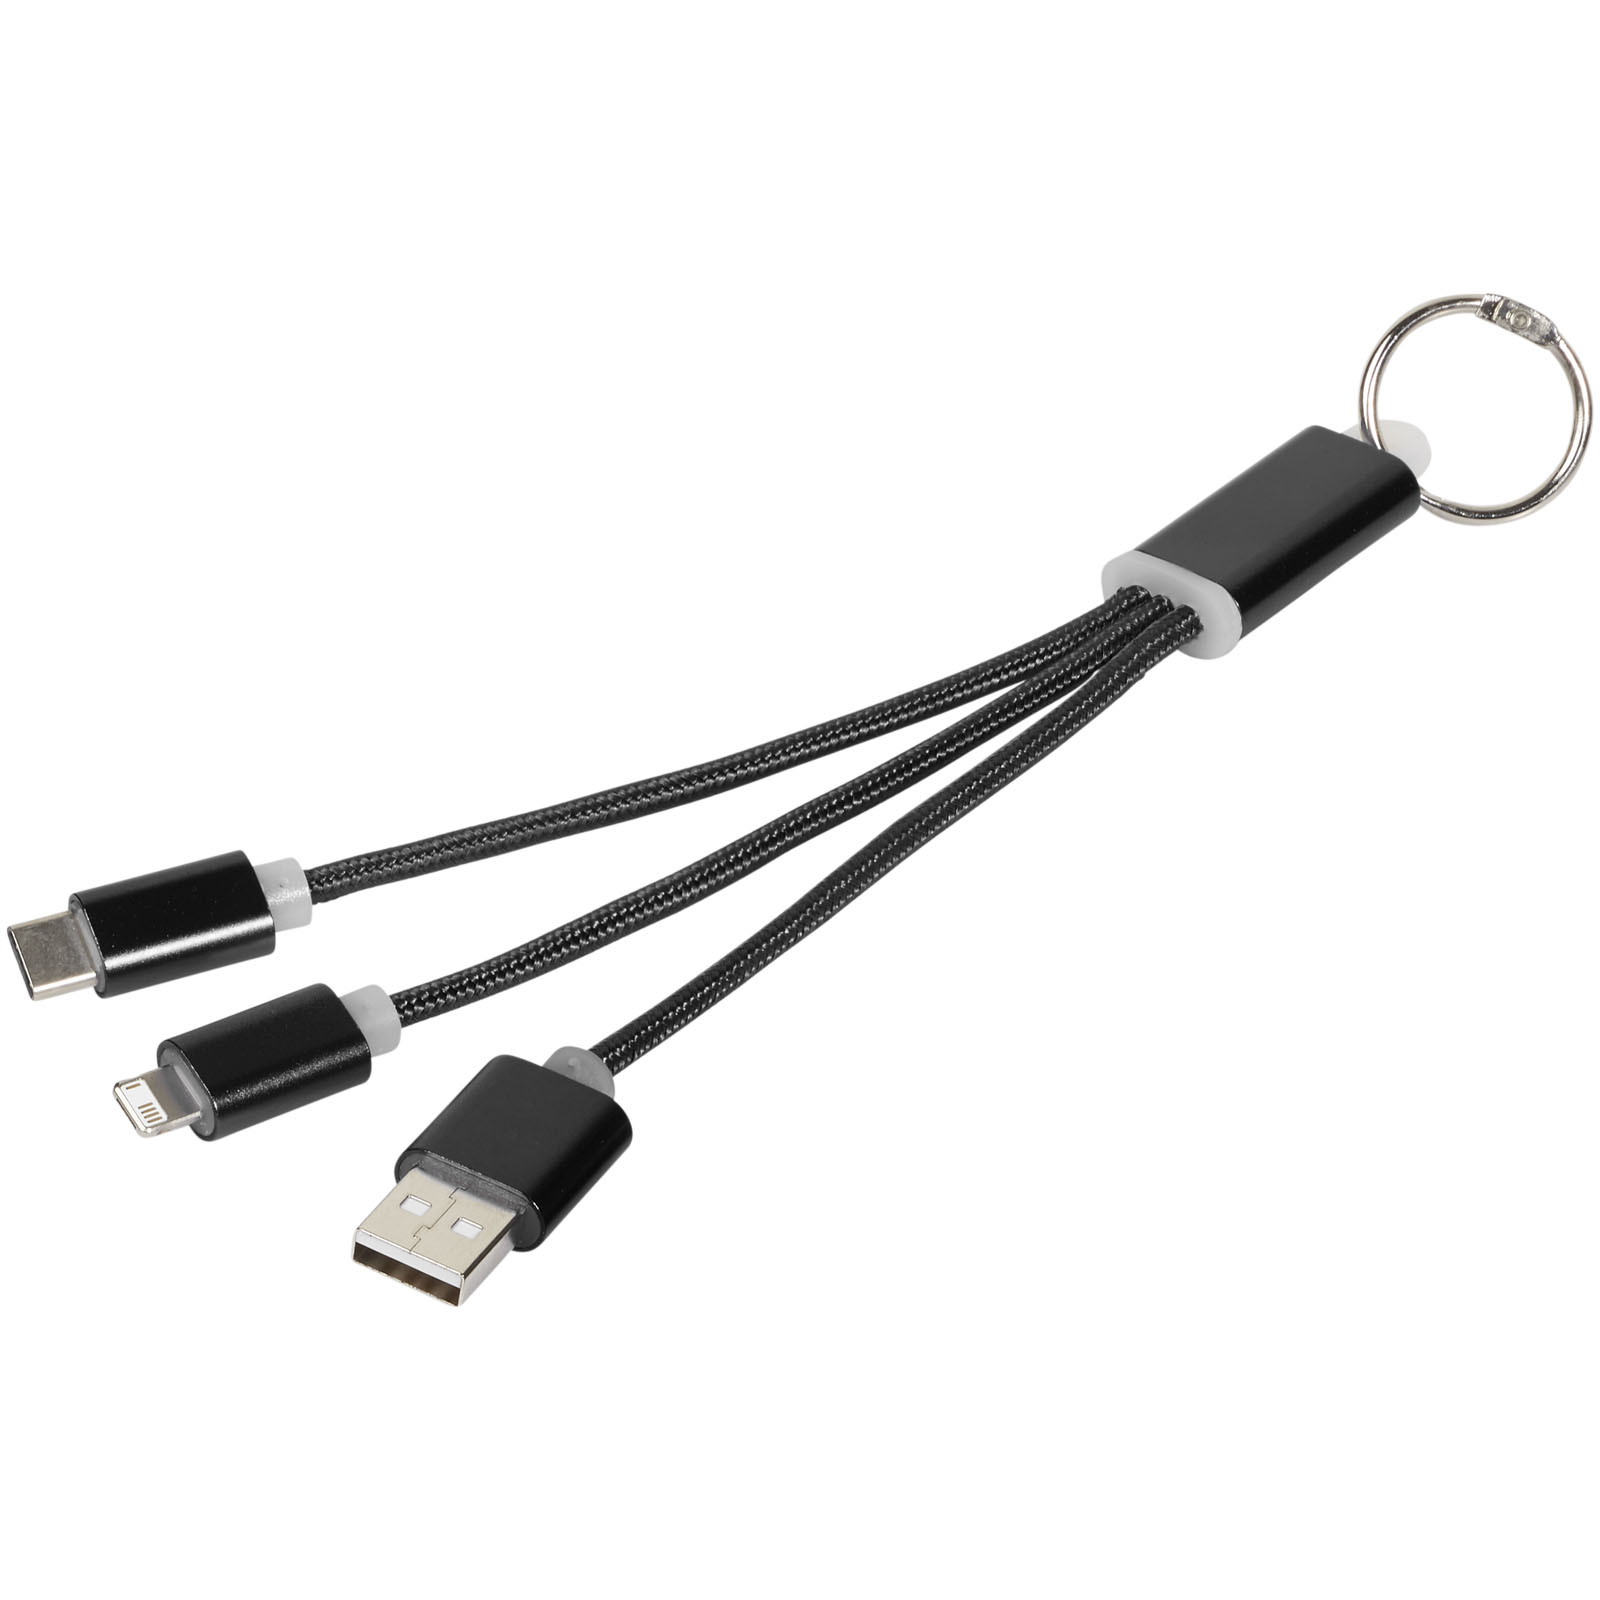 Technology - Metal 3-in-1 charging cable with keychain